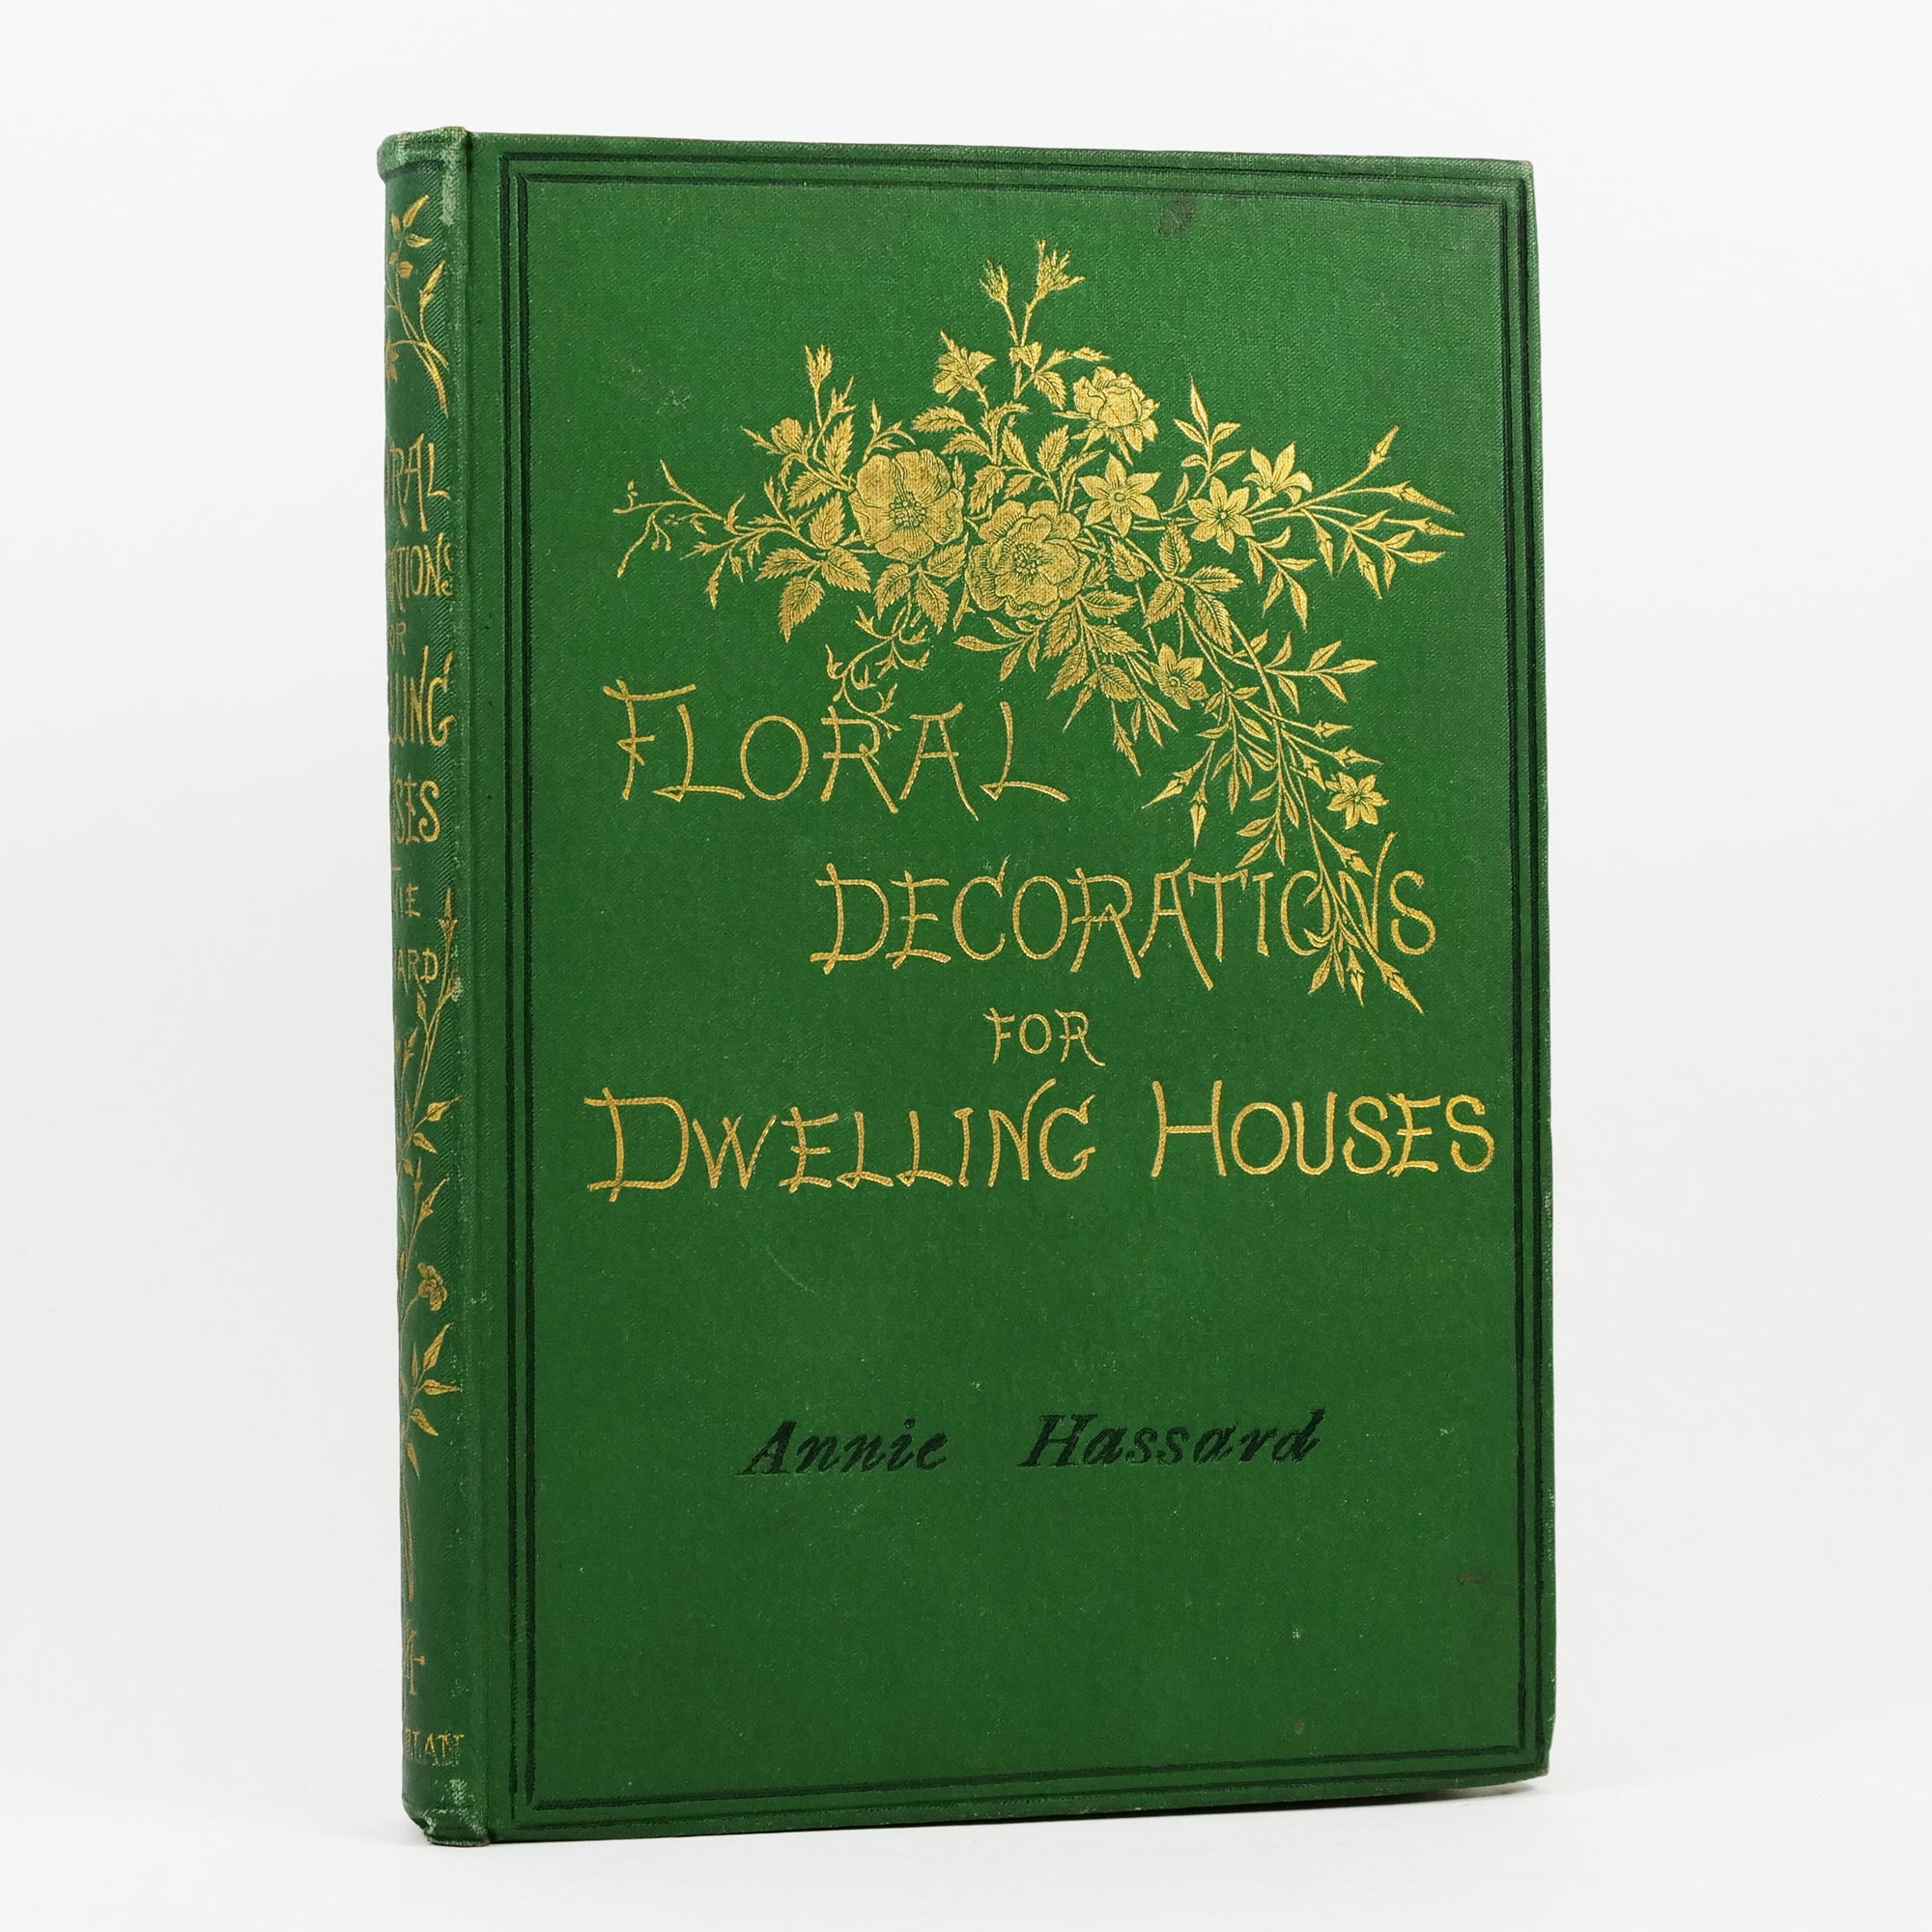 A Victorian Guide to Houseplants: Floral Decorations for the Dwelling House by Annie Hassard